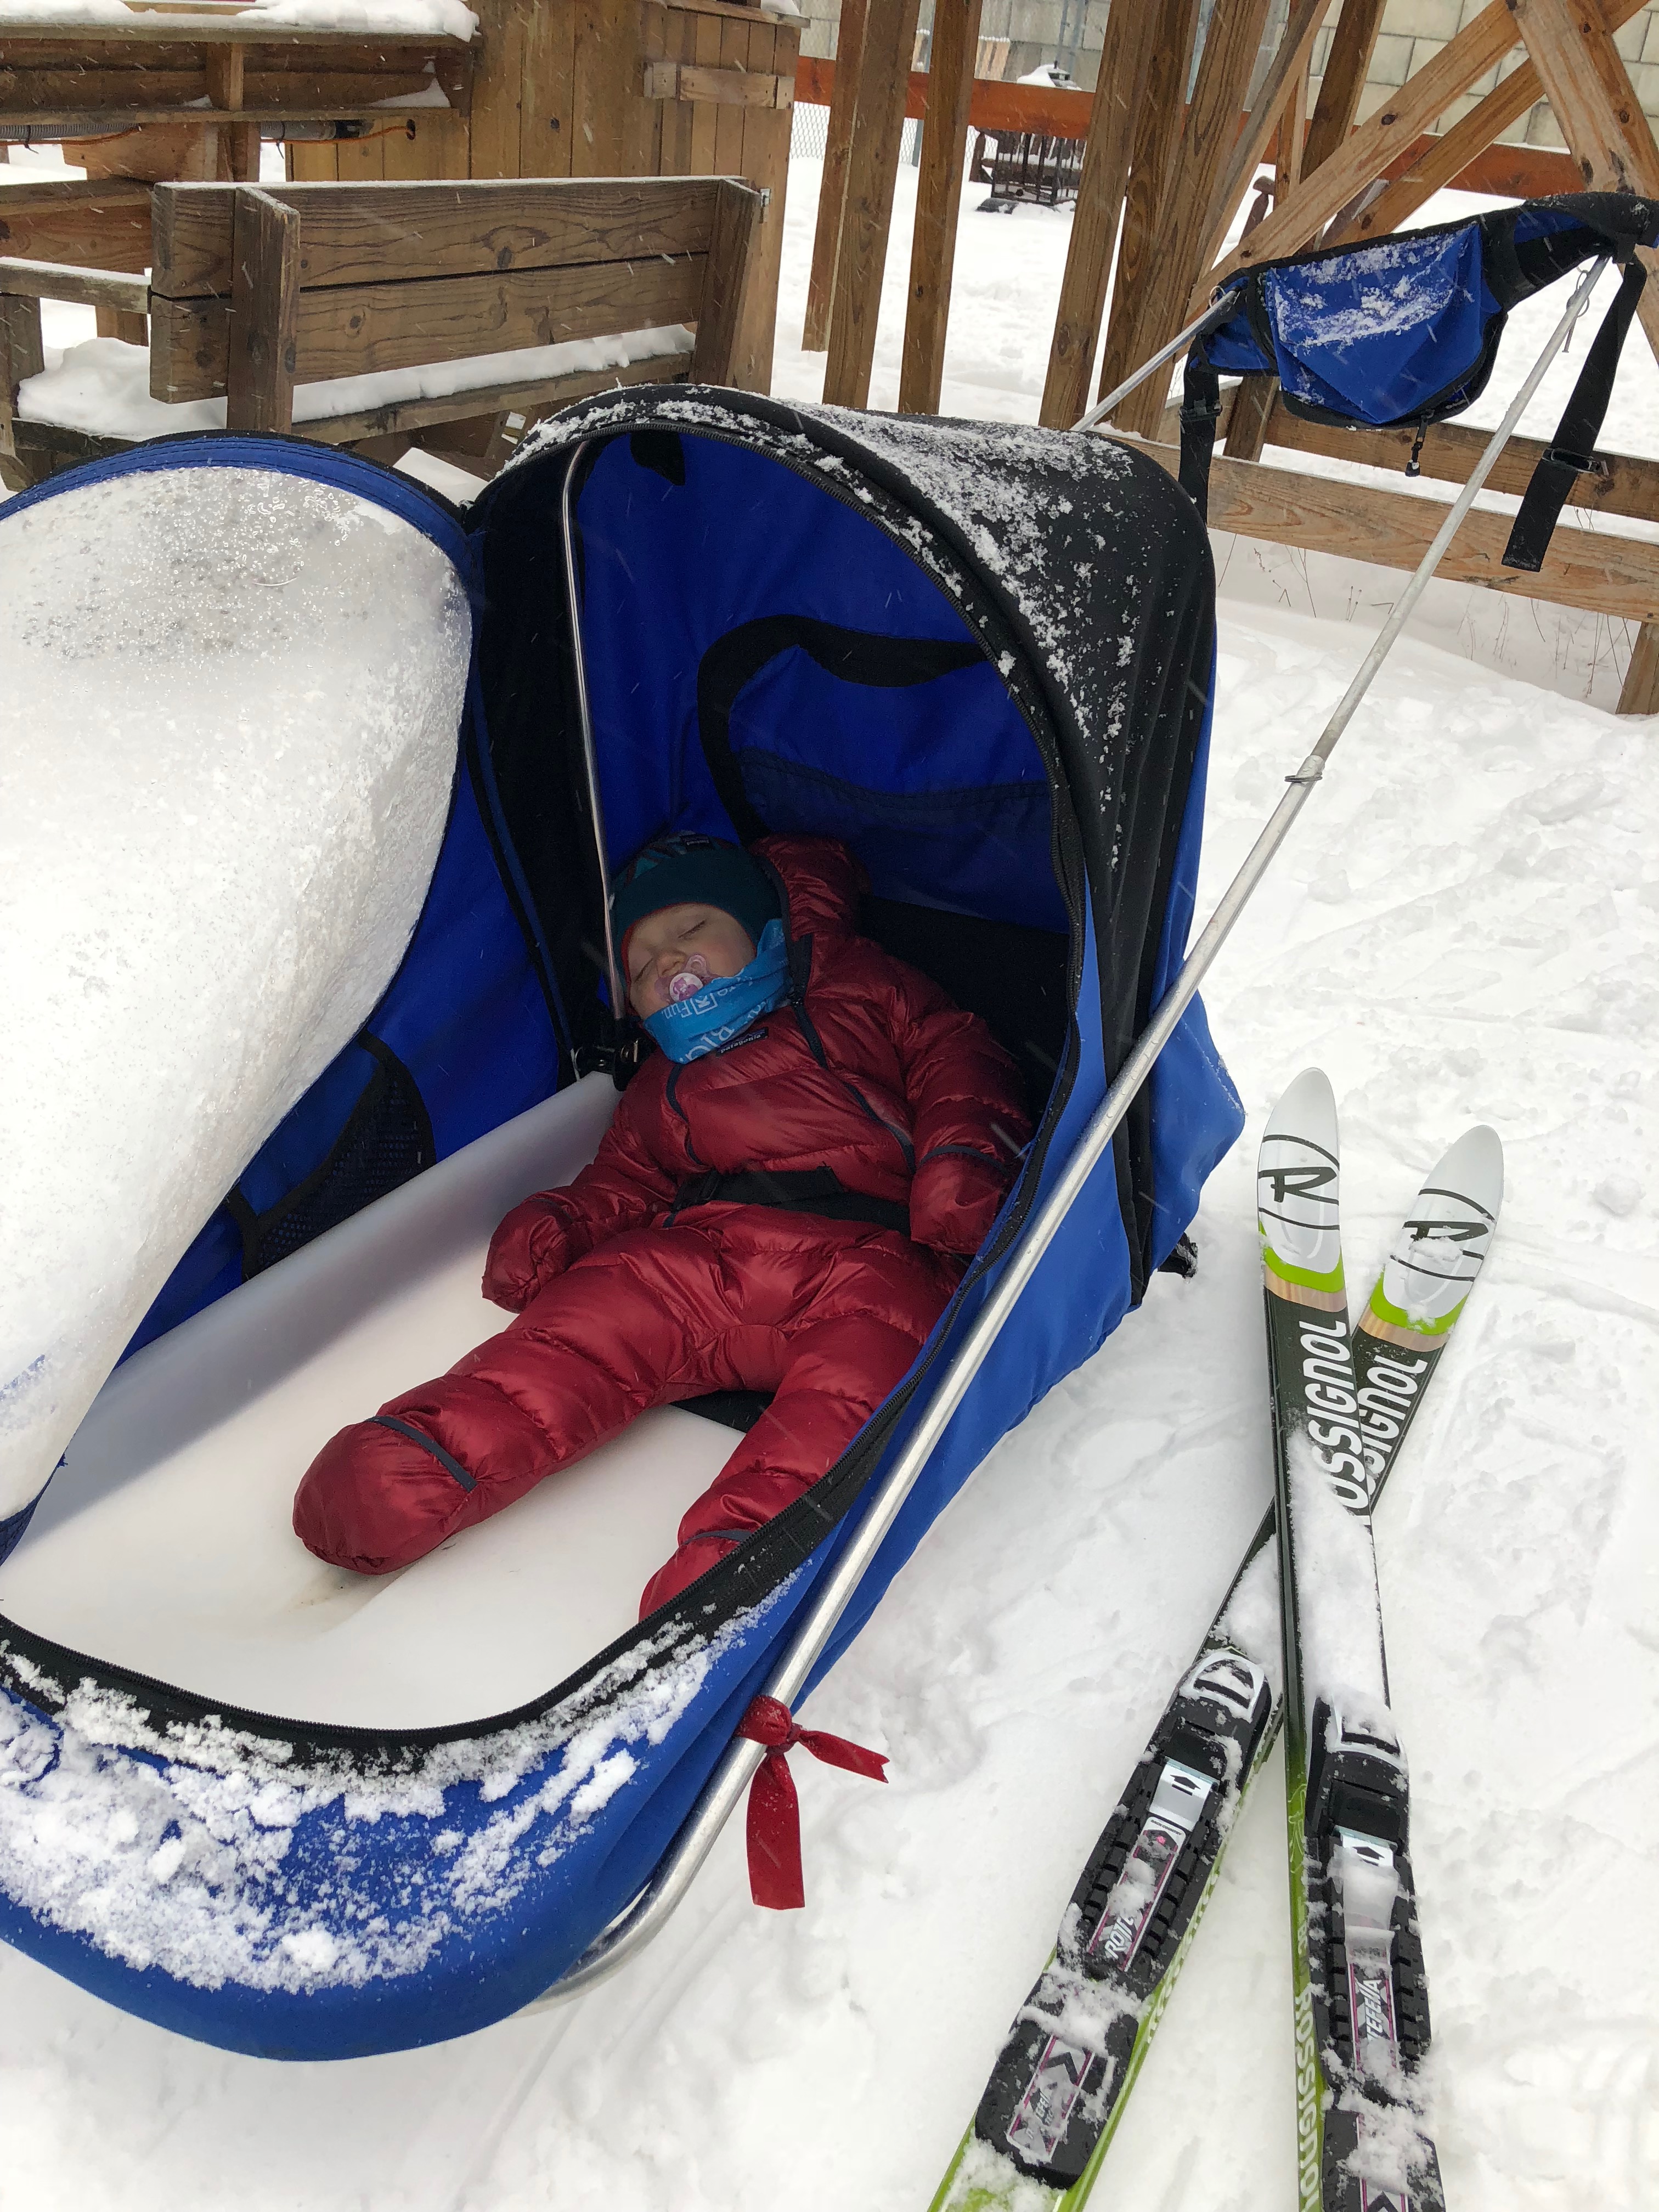 Mantsjoerije dwaas beddengoed Smuggs for Young Families: A Perfect Ski Trip with Baby - All Mountain Mamas